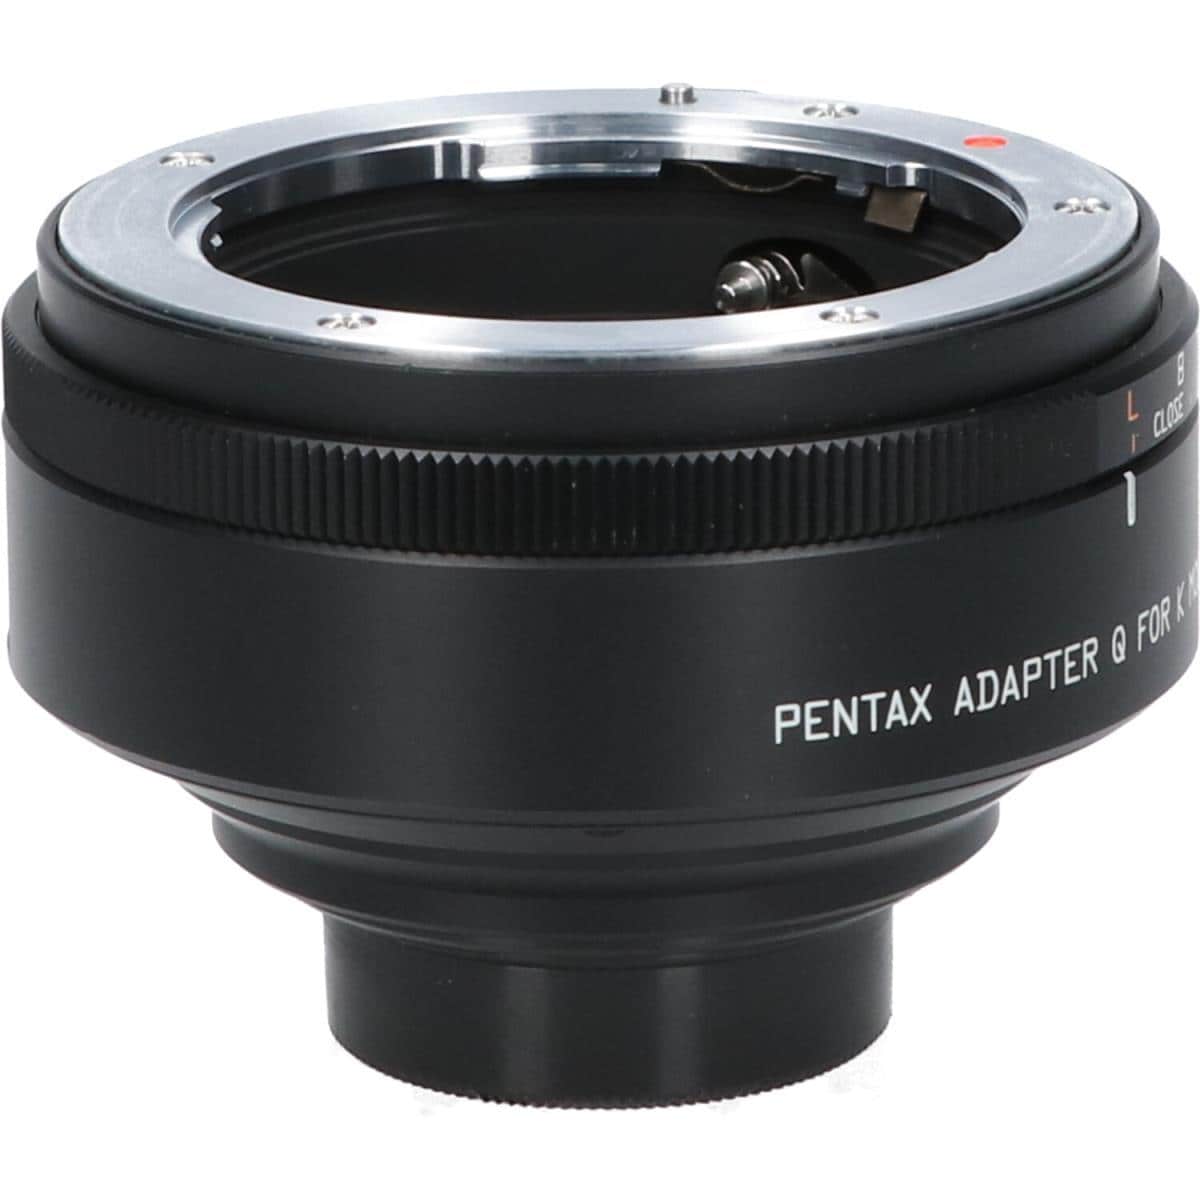 PENTAX ADAPTER Q FOR K